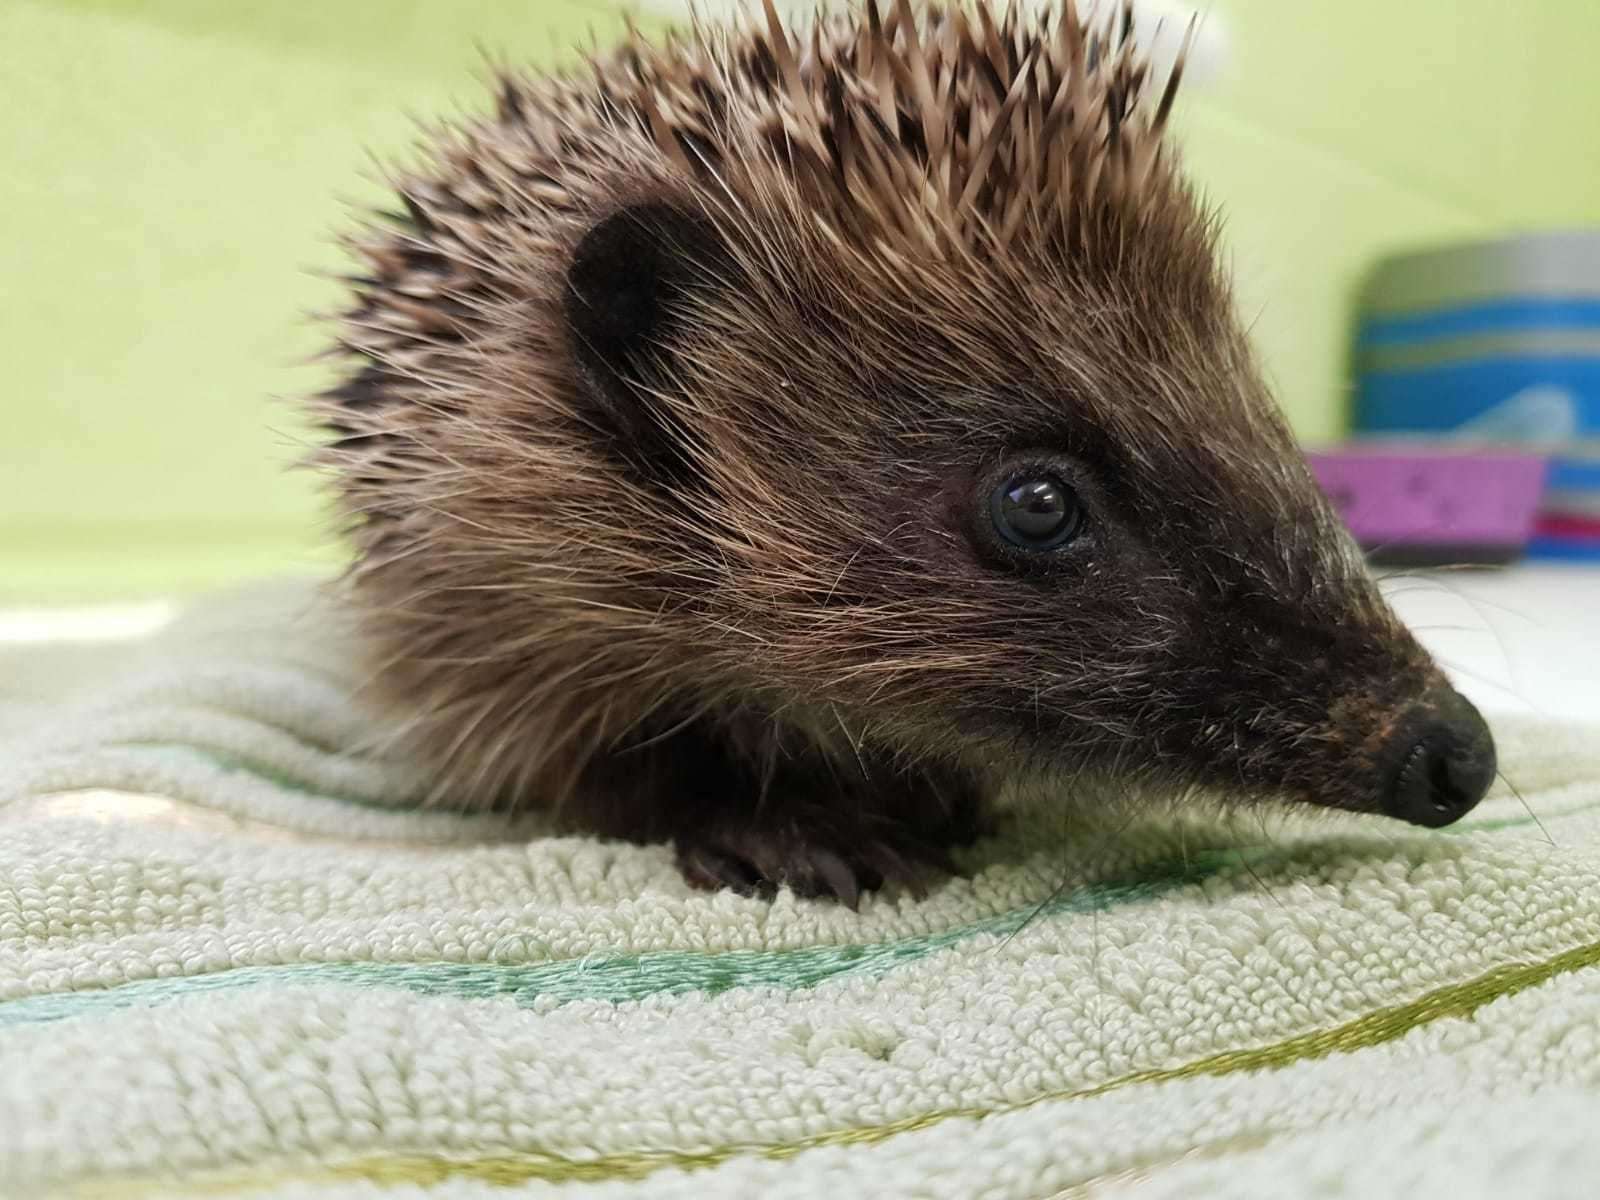 One of the hedgehogs cared for by the SSPCA.